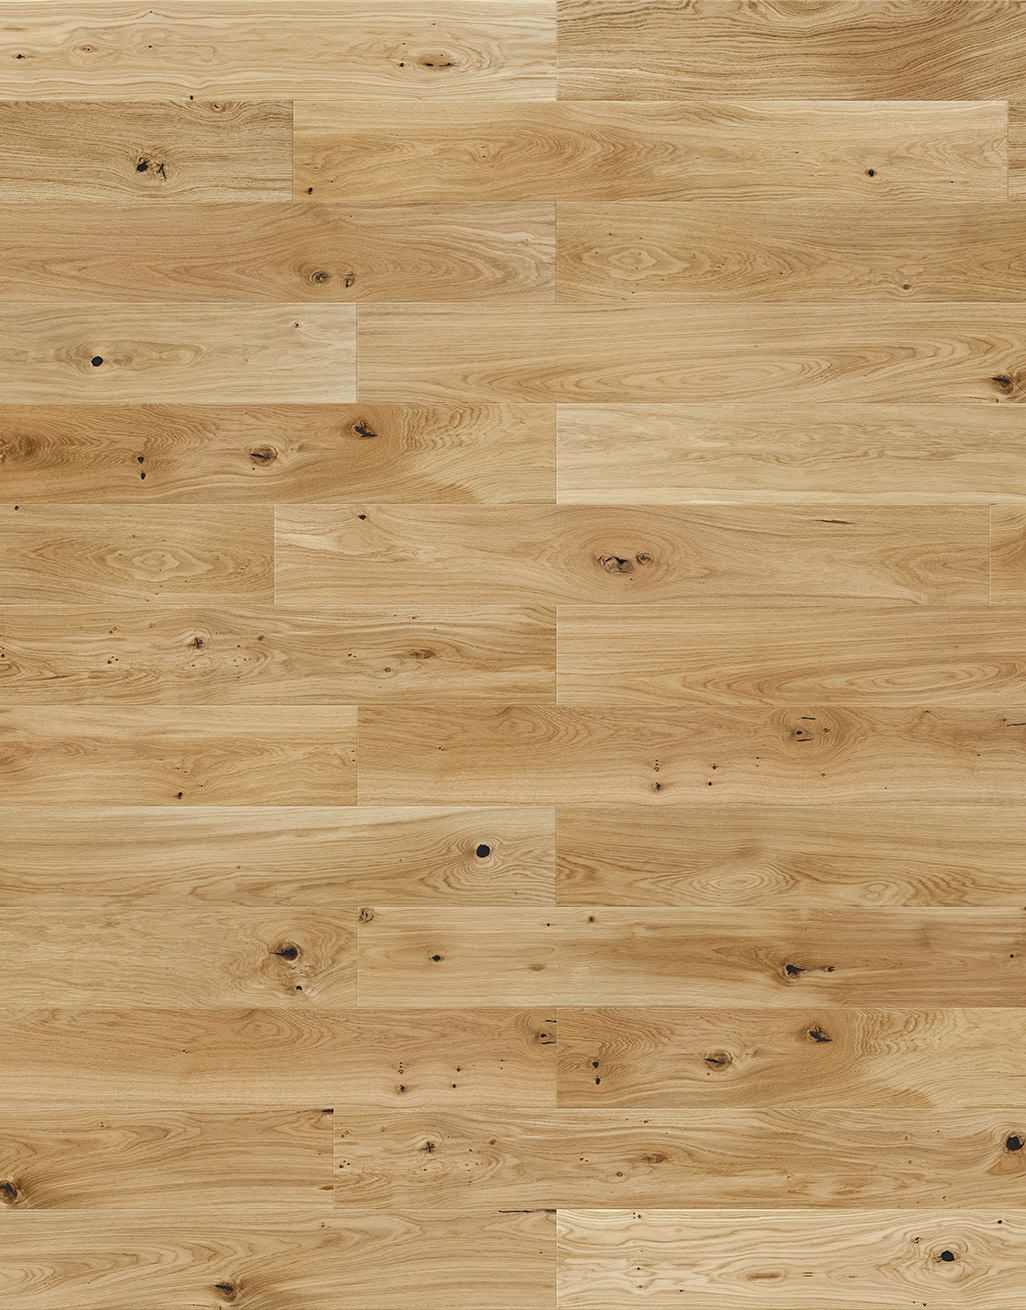 Carpenters Choice Natural 14mm x 155mm Lacquered Engineered Wood Flooring 8